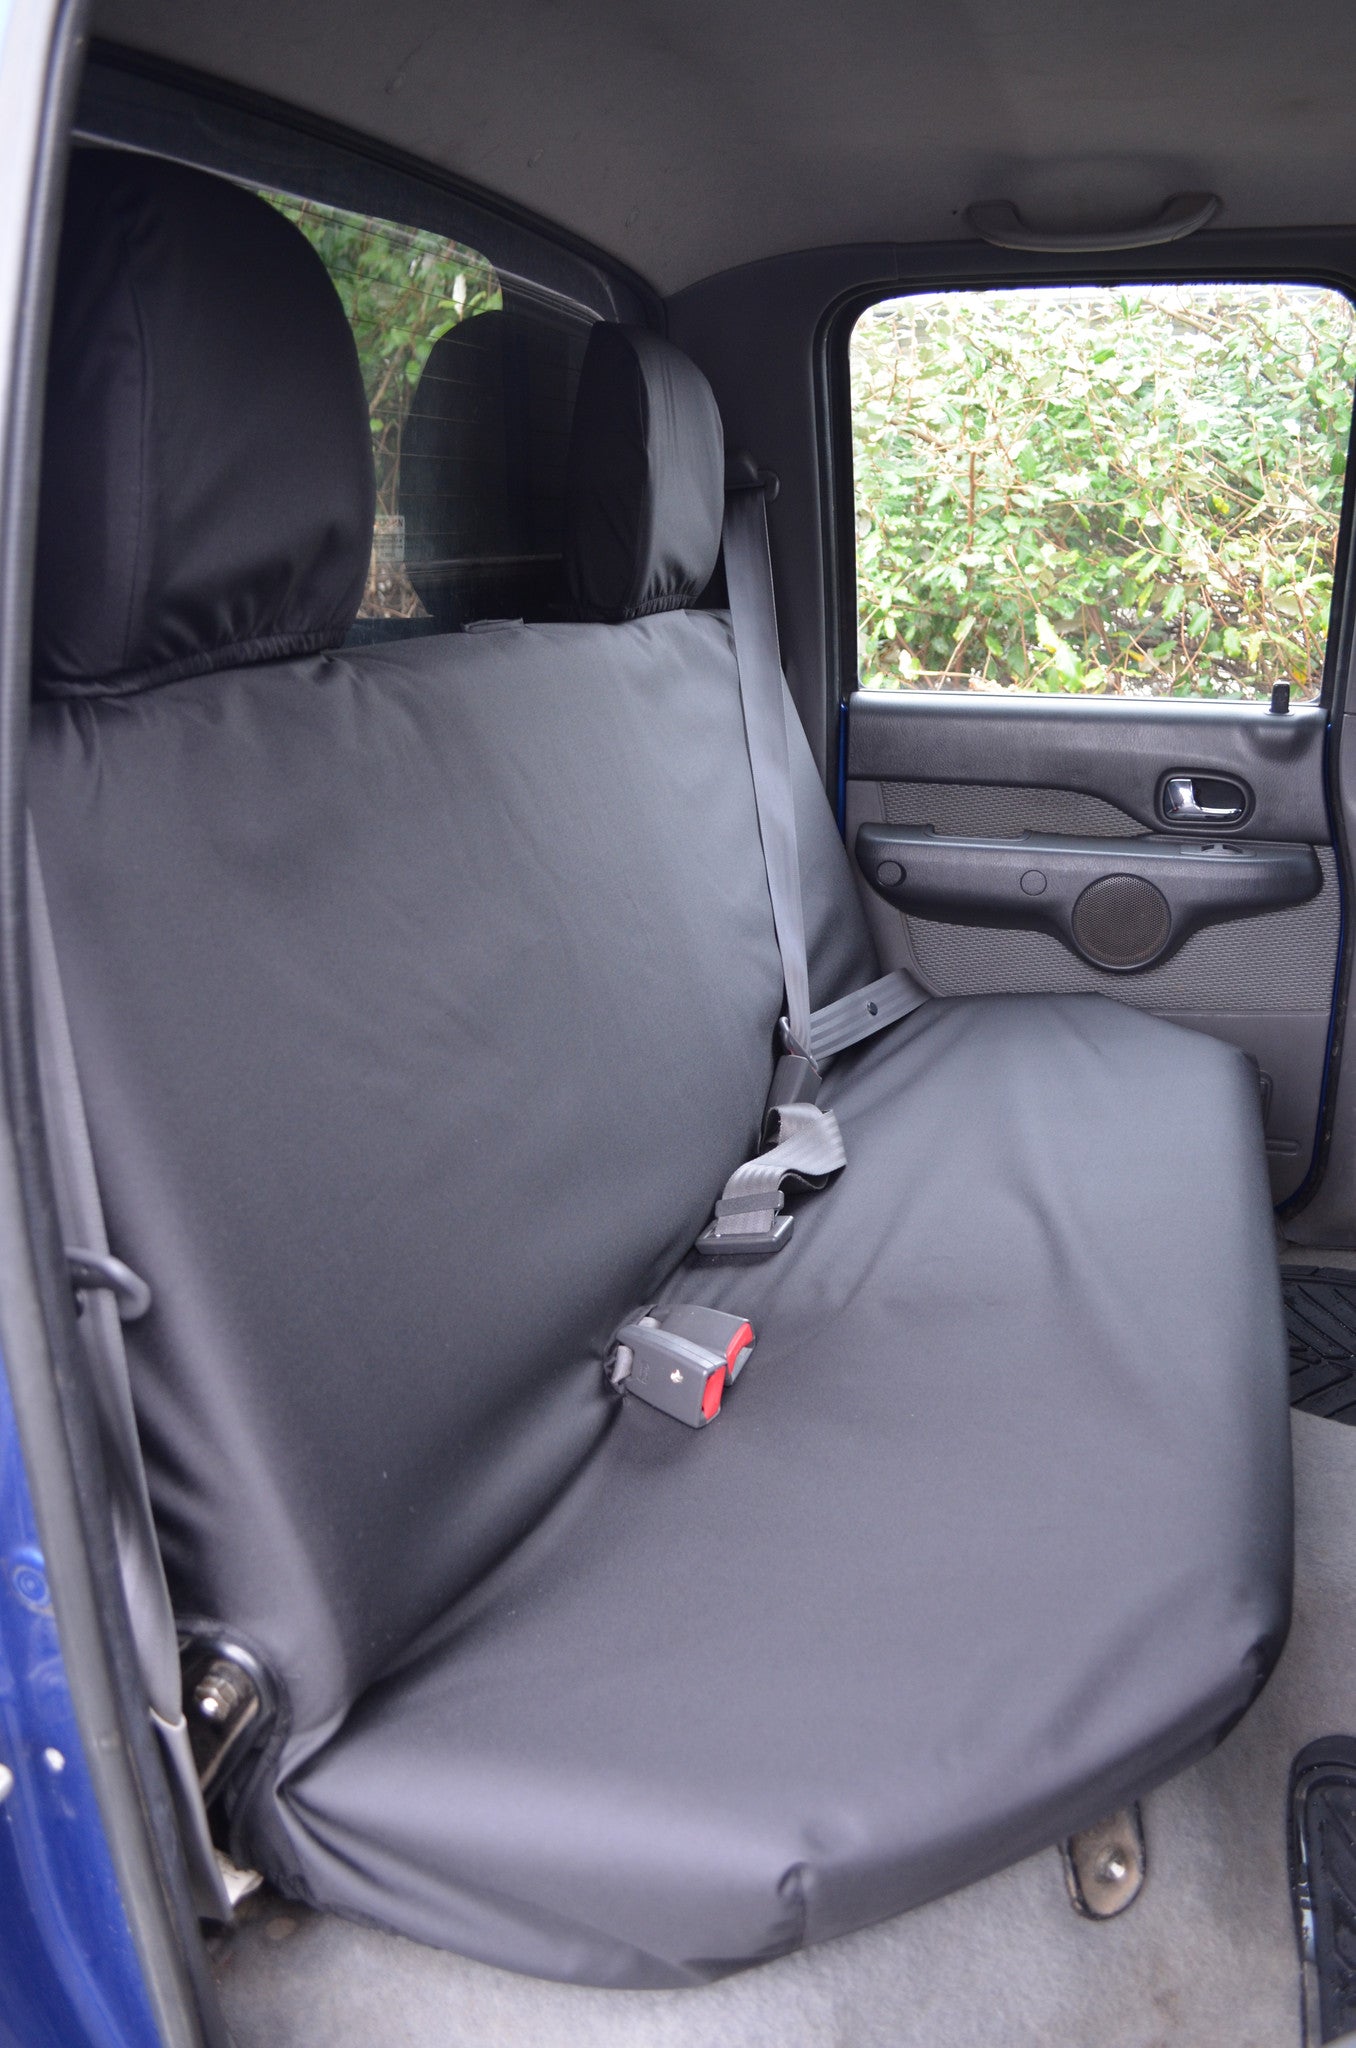 Ford Ranger 1999 to 2006 Seat Covers Rear Seat Cover / Black Turtle Covers Ltd